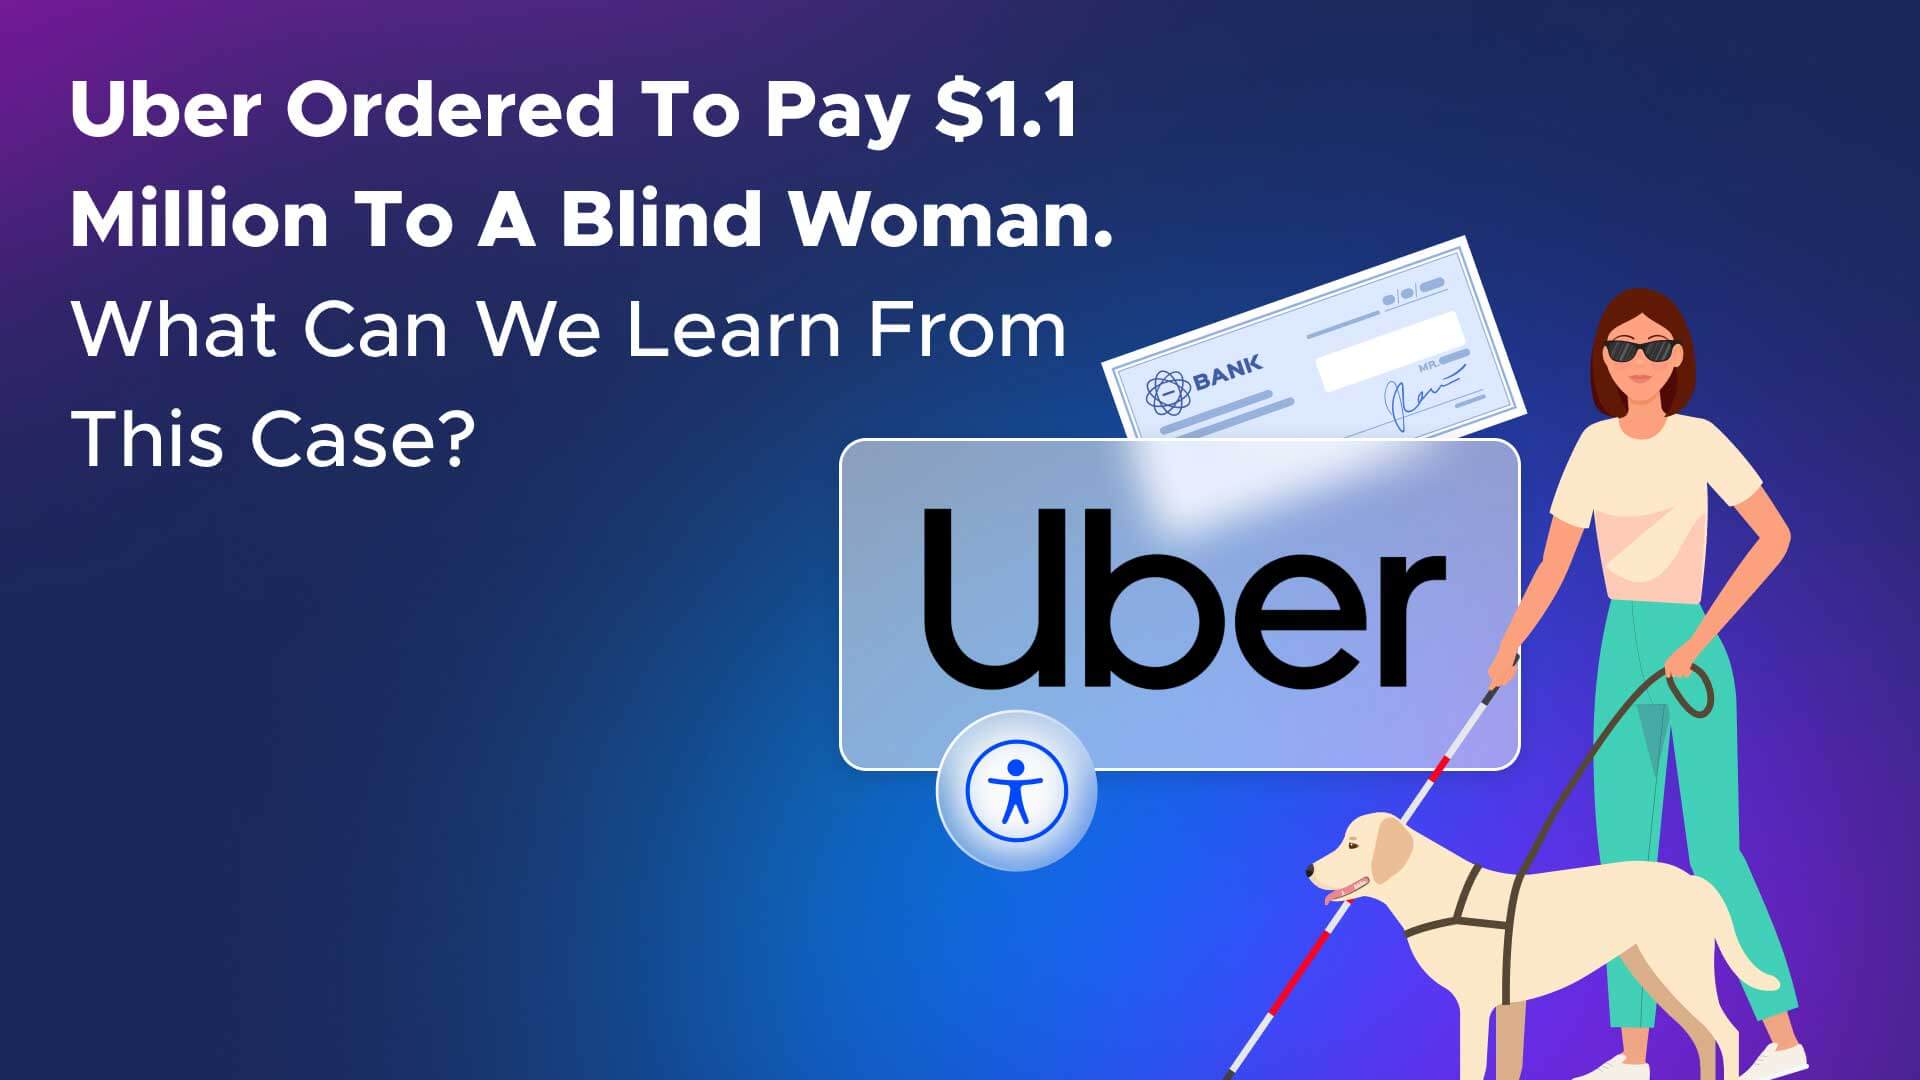 Uber Ordered to Pay $1.1 Million to a Blind Woman. What can we Learn From this Case?